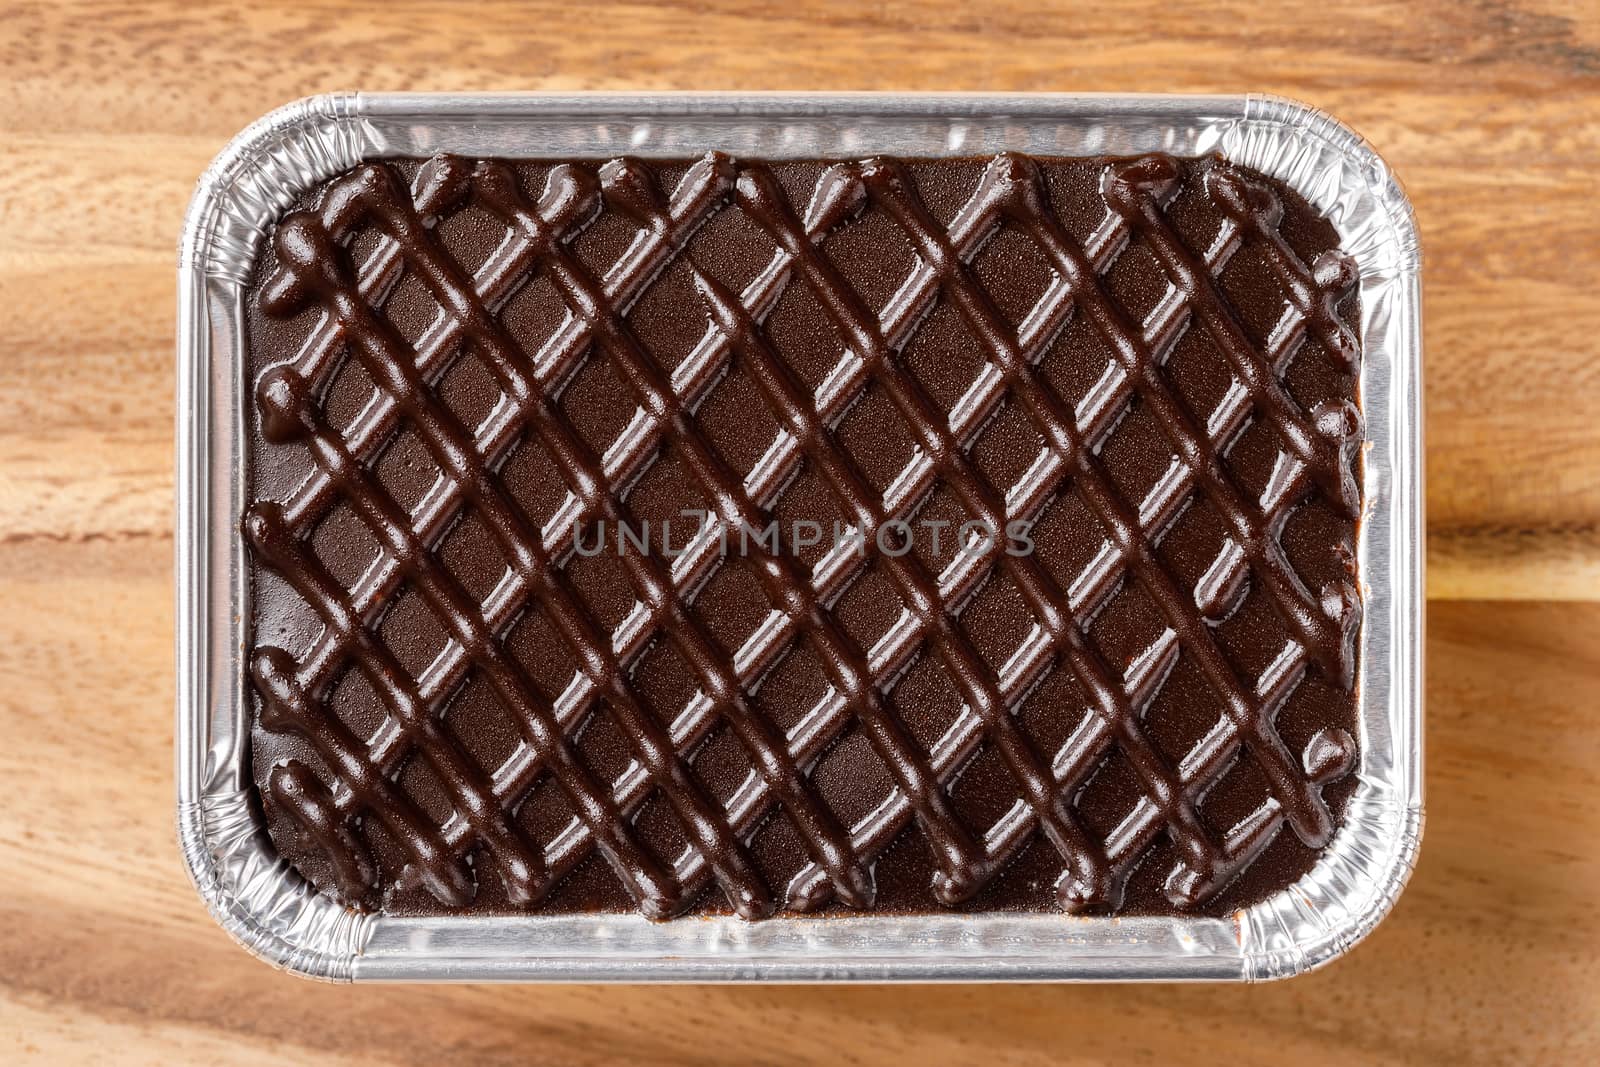 Chocolate cake in aluminium foil tray by smuay